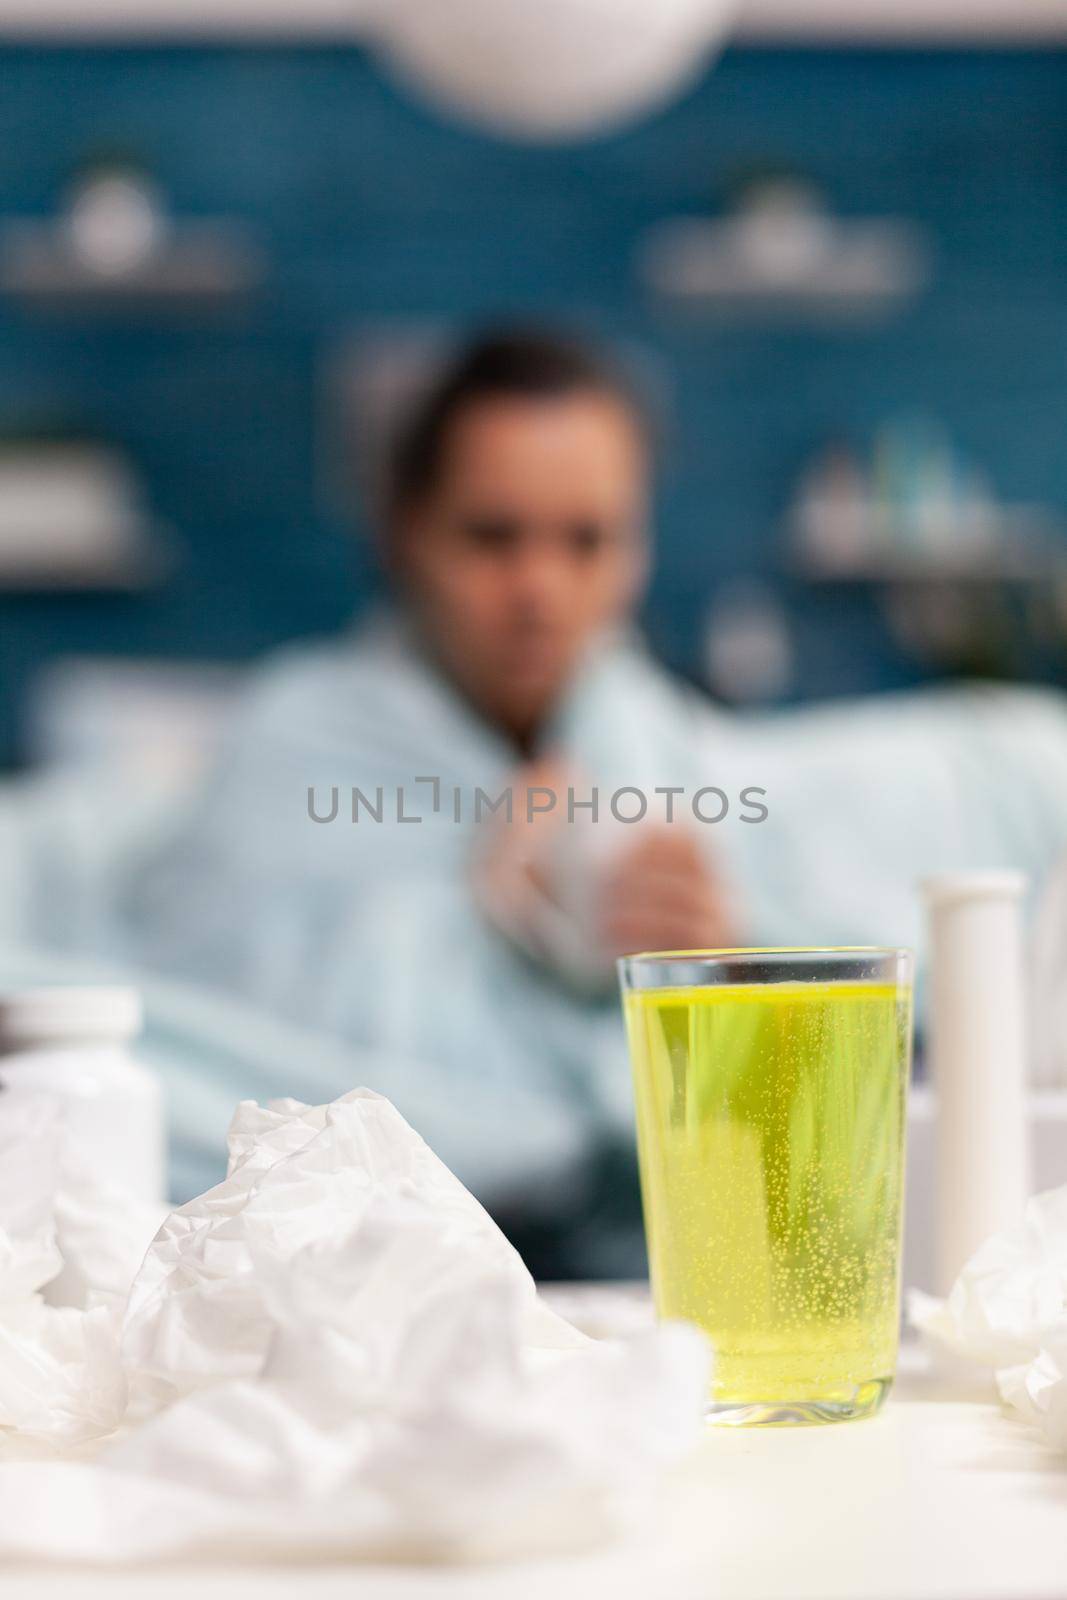 Cold young woman sitting at home on sofa with mug of tea against sickness disease illness. Caucasian person with temperature virus symptoms drinking warm vitamins from mug